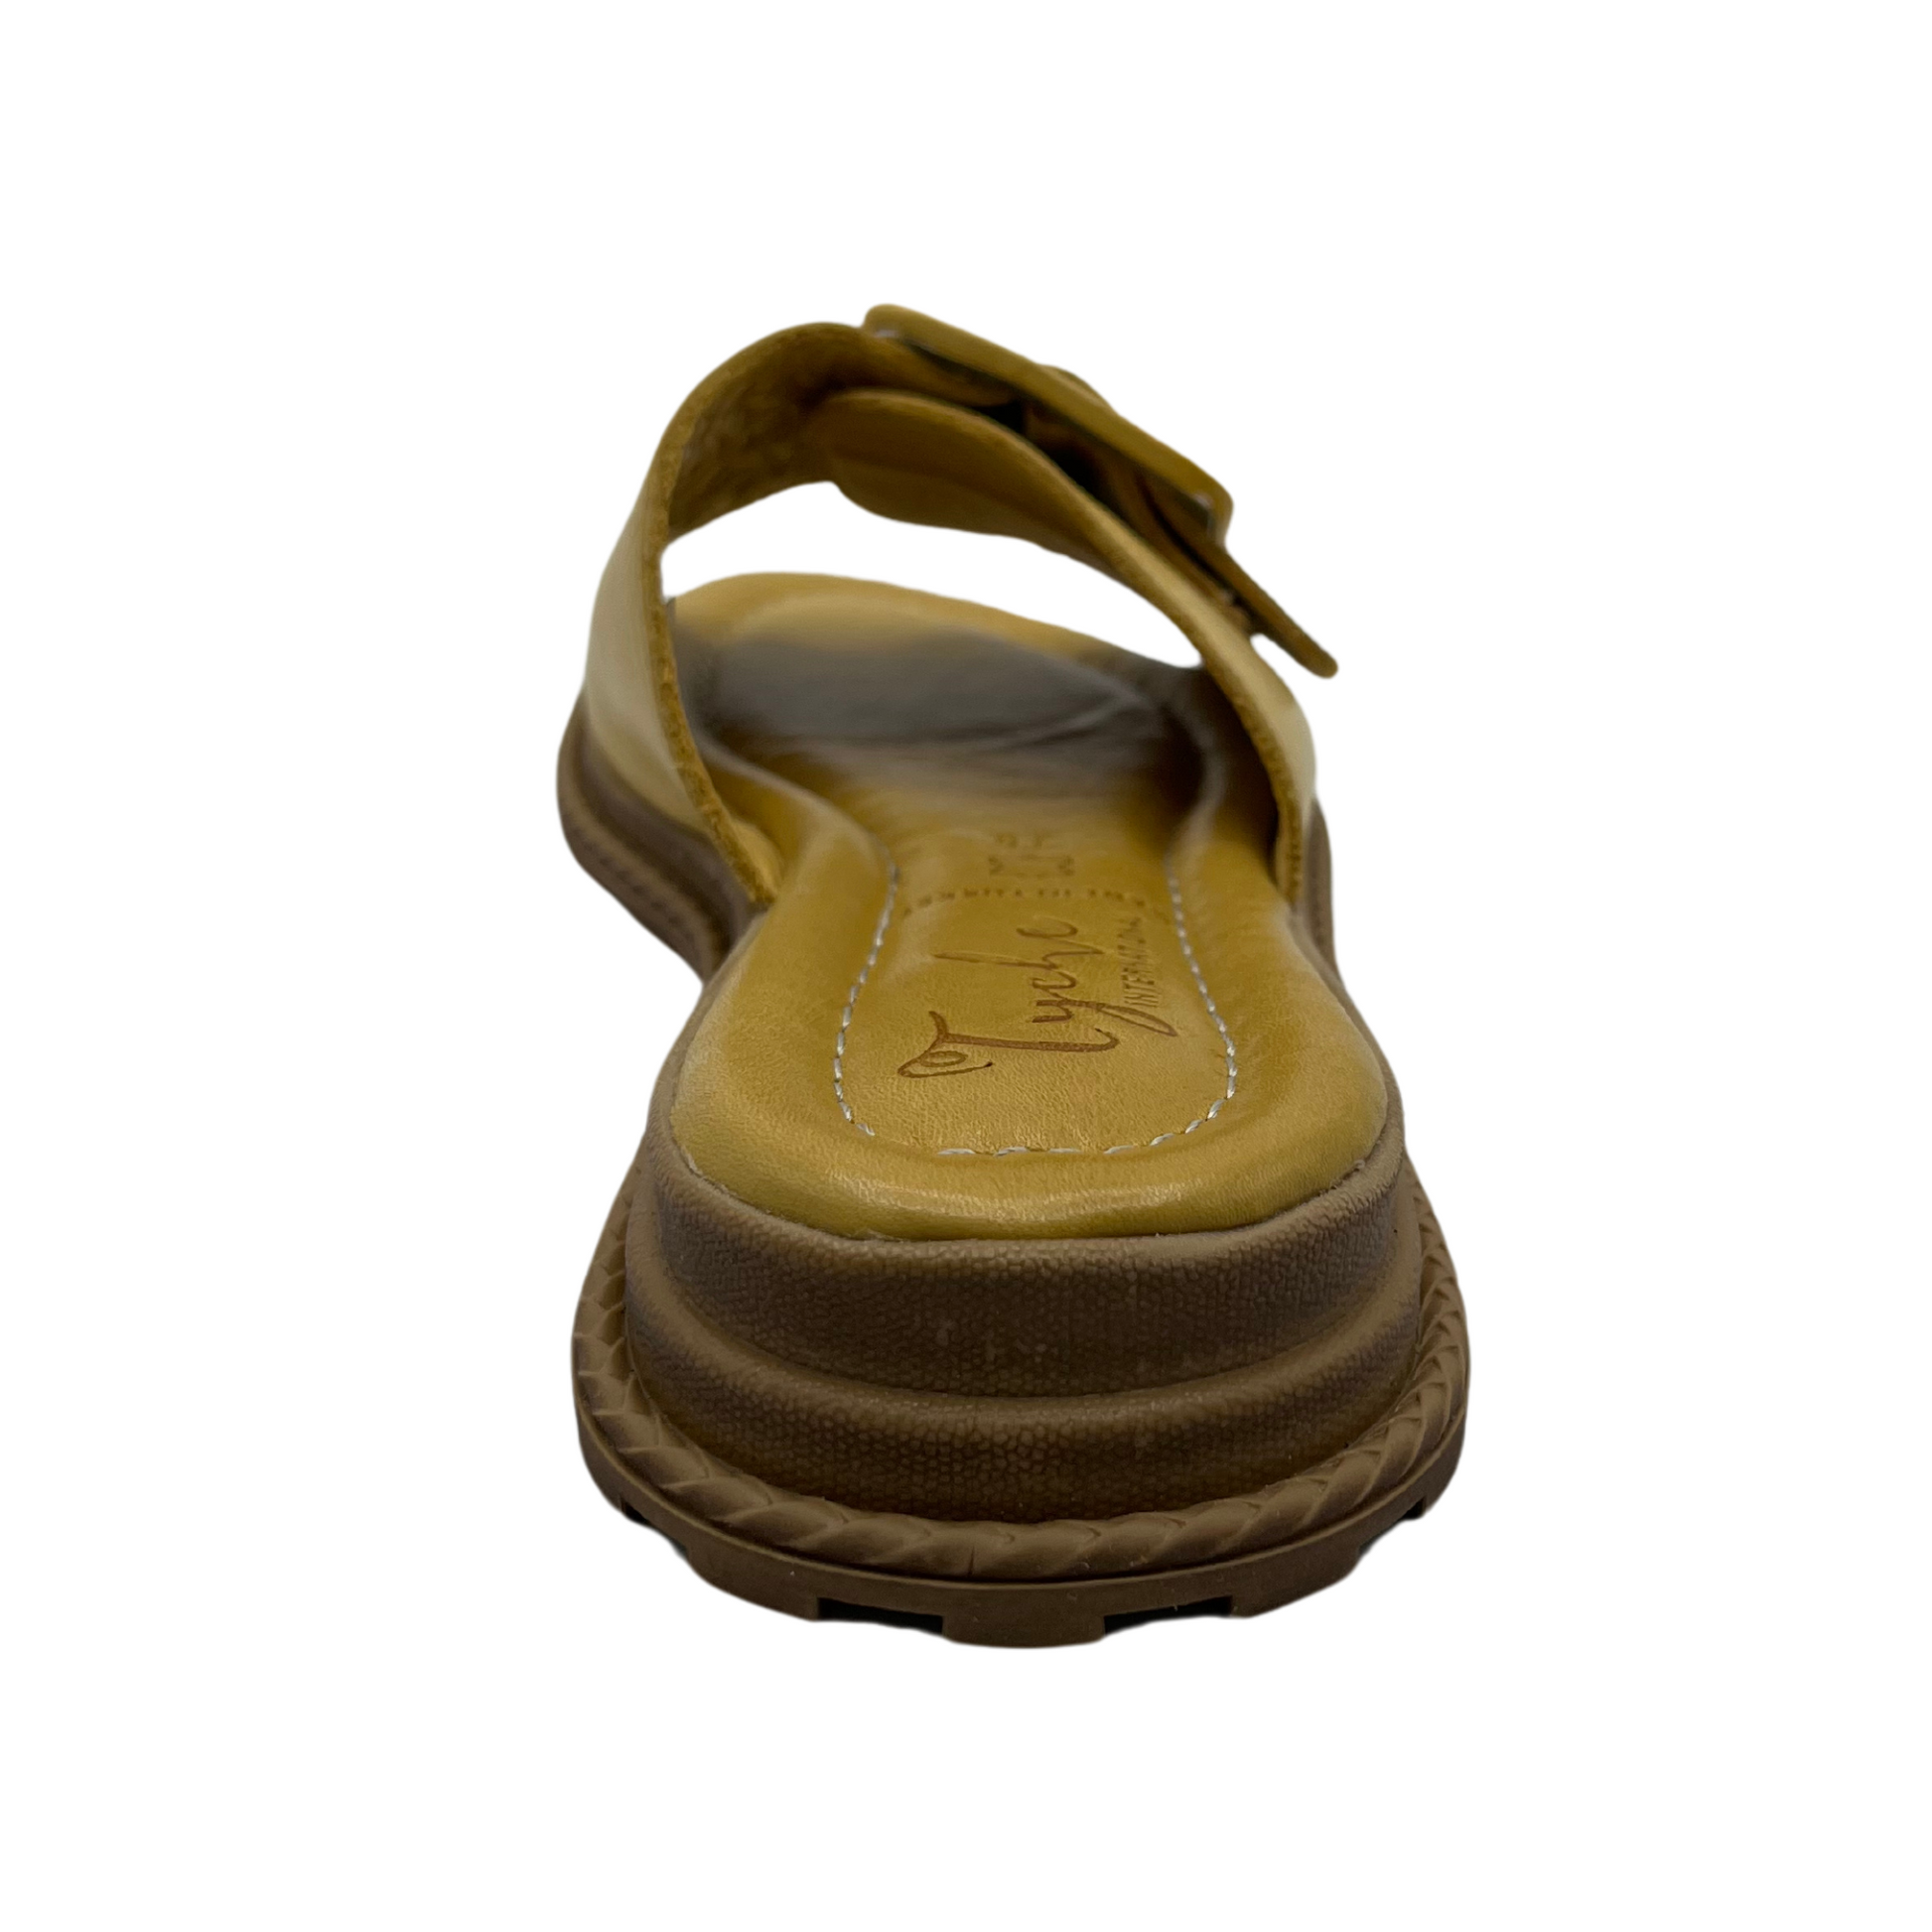 Back view of yellow leather sandal with oversized buckle on strap. Leather lined, cushioned footbed and open toe